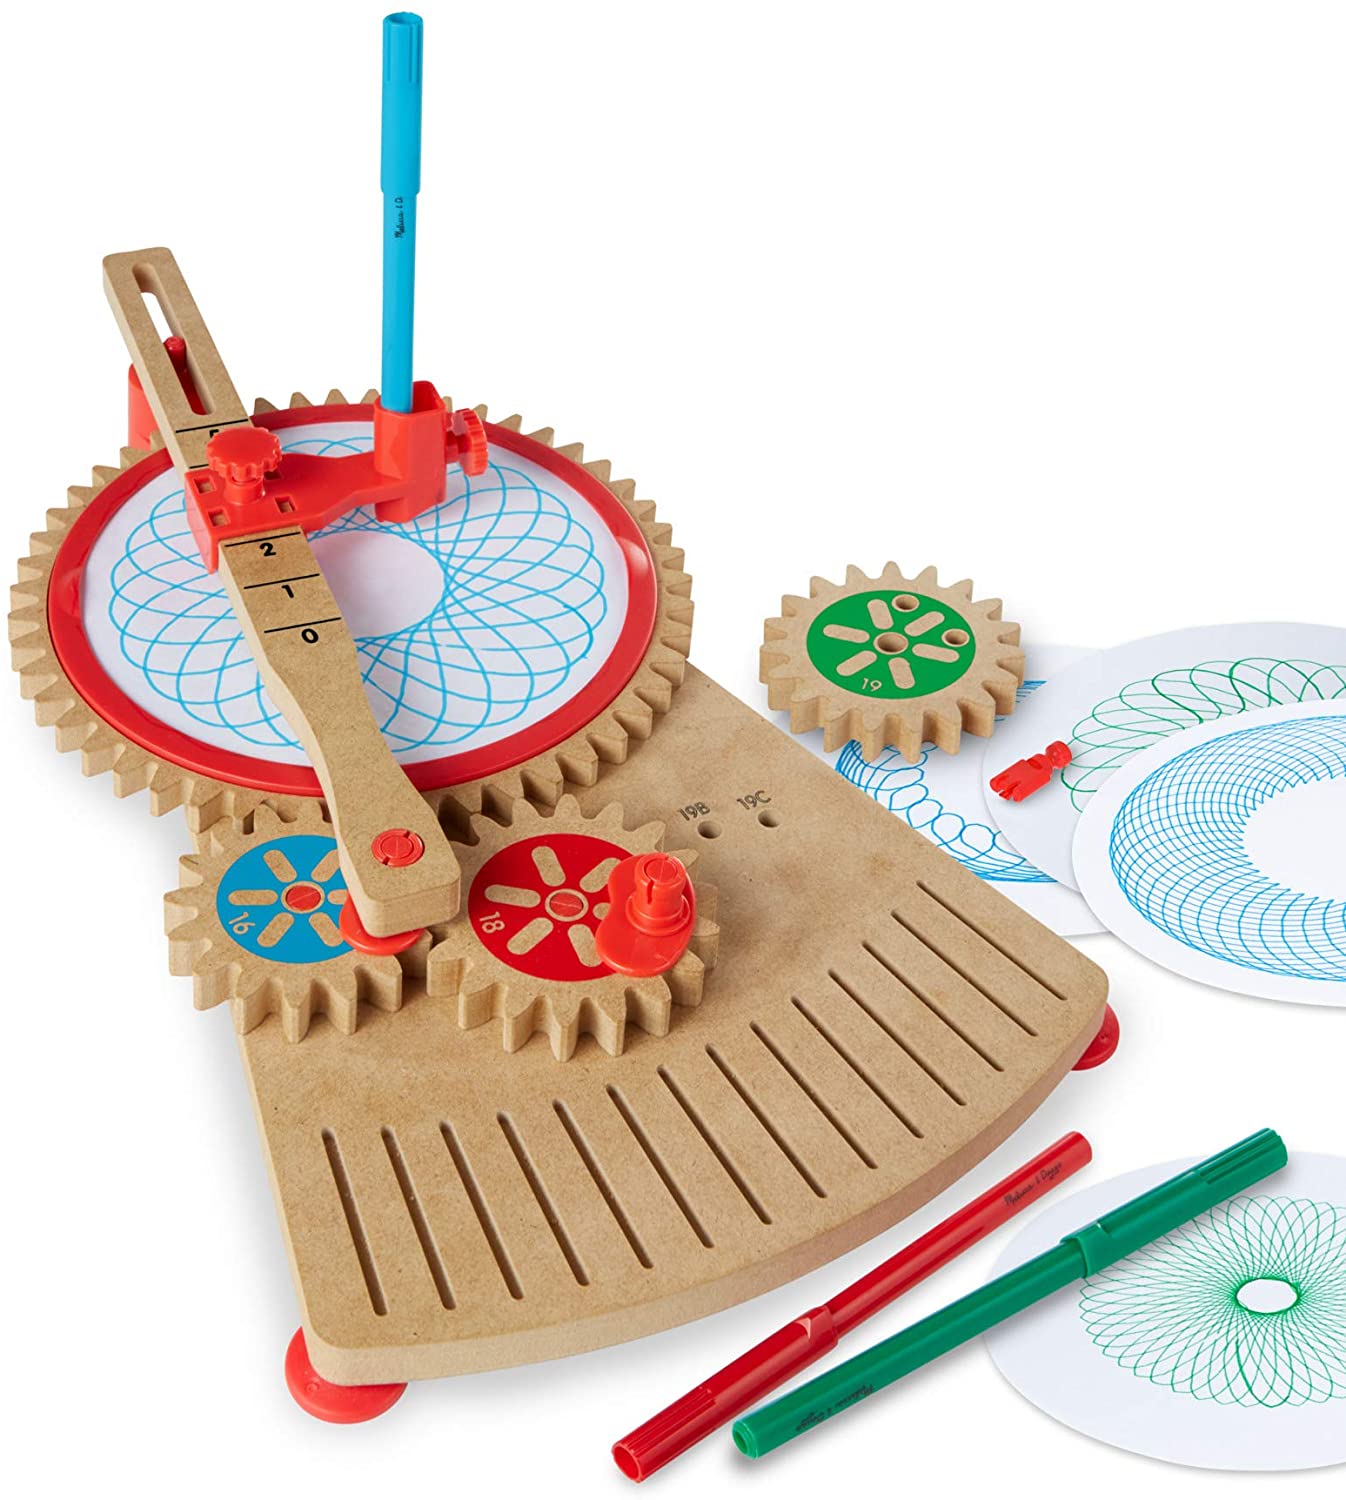 Melissa & Doug Innovation Academy Art Gears Wooden Build-and-Play Drawing Machine